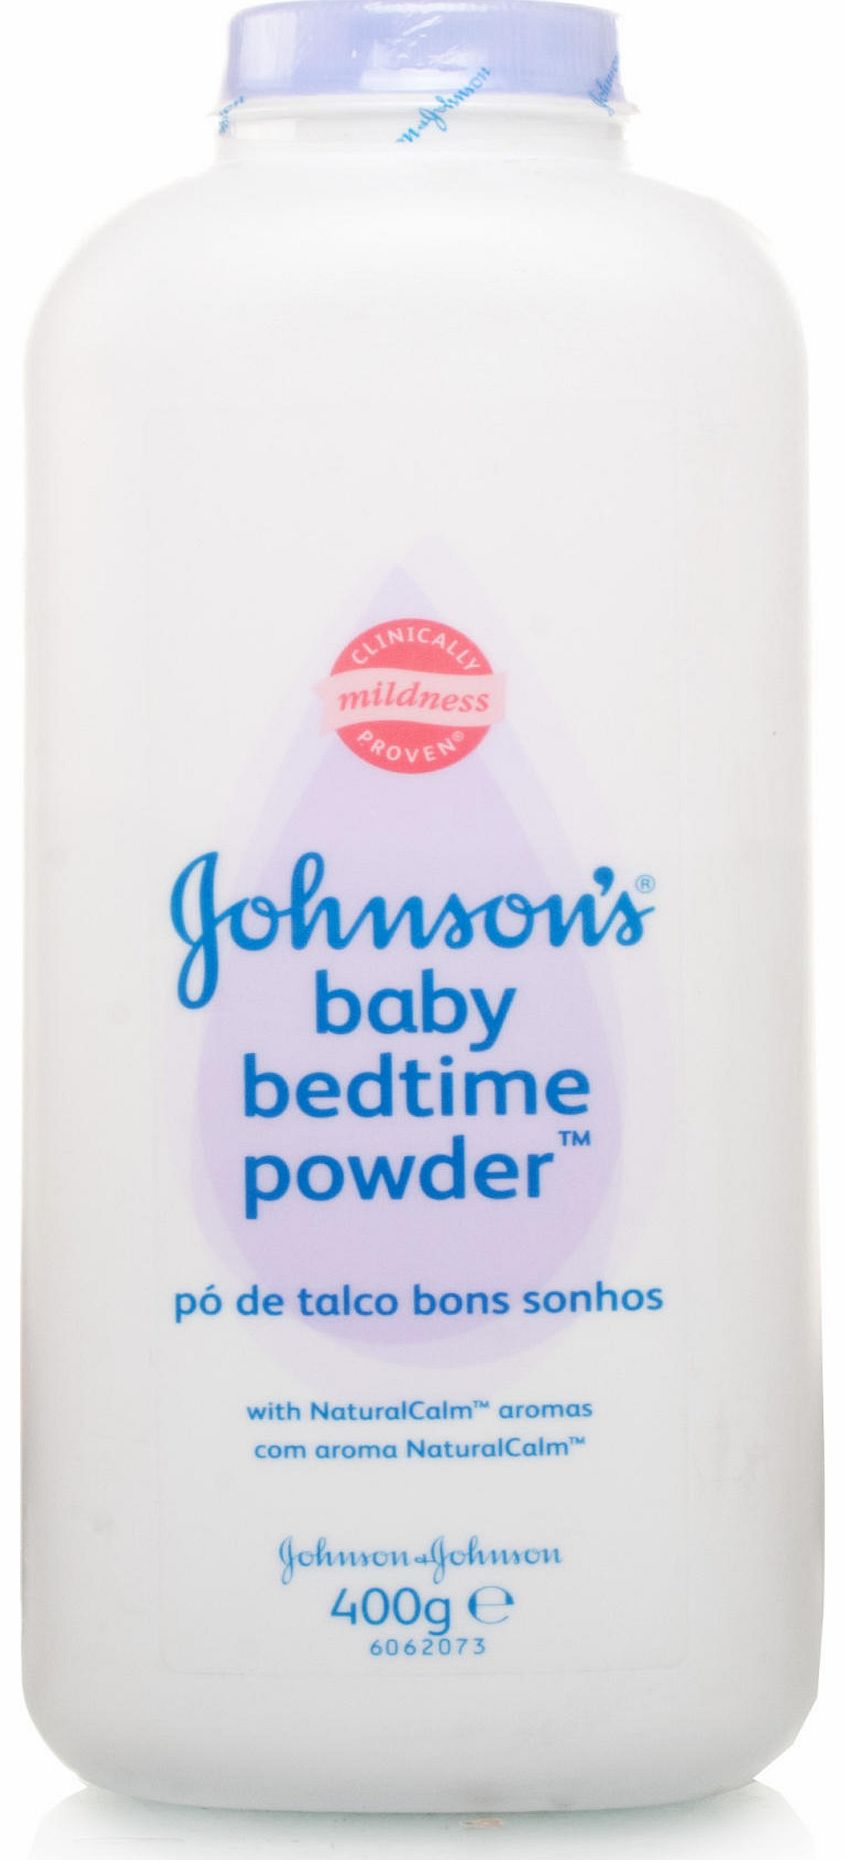 Johnsons Baby Bedtime Powder - has been clinically proven to help promote better sleep in babies and toddlers as well as helping eliminate friction while keeping skin cool and comfortable. Clinically proven to be safe, mild and gentle. Allergy and de